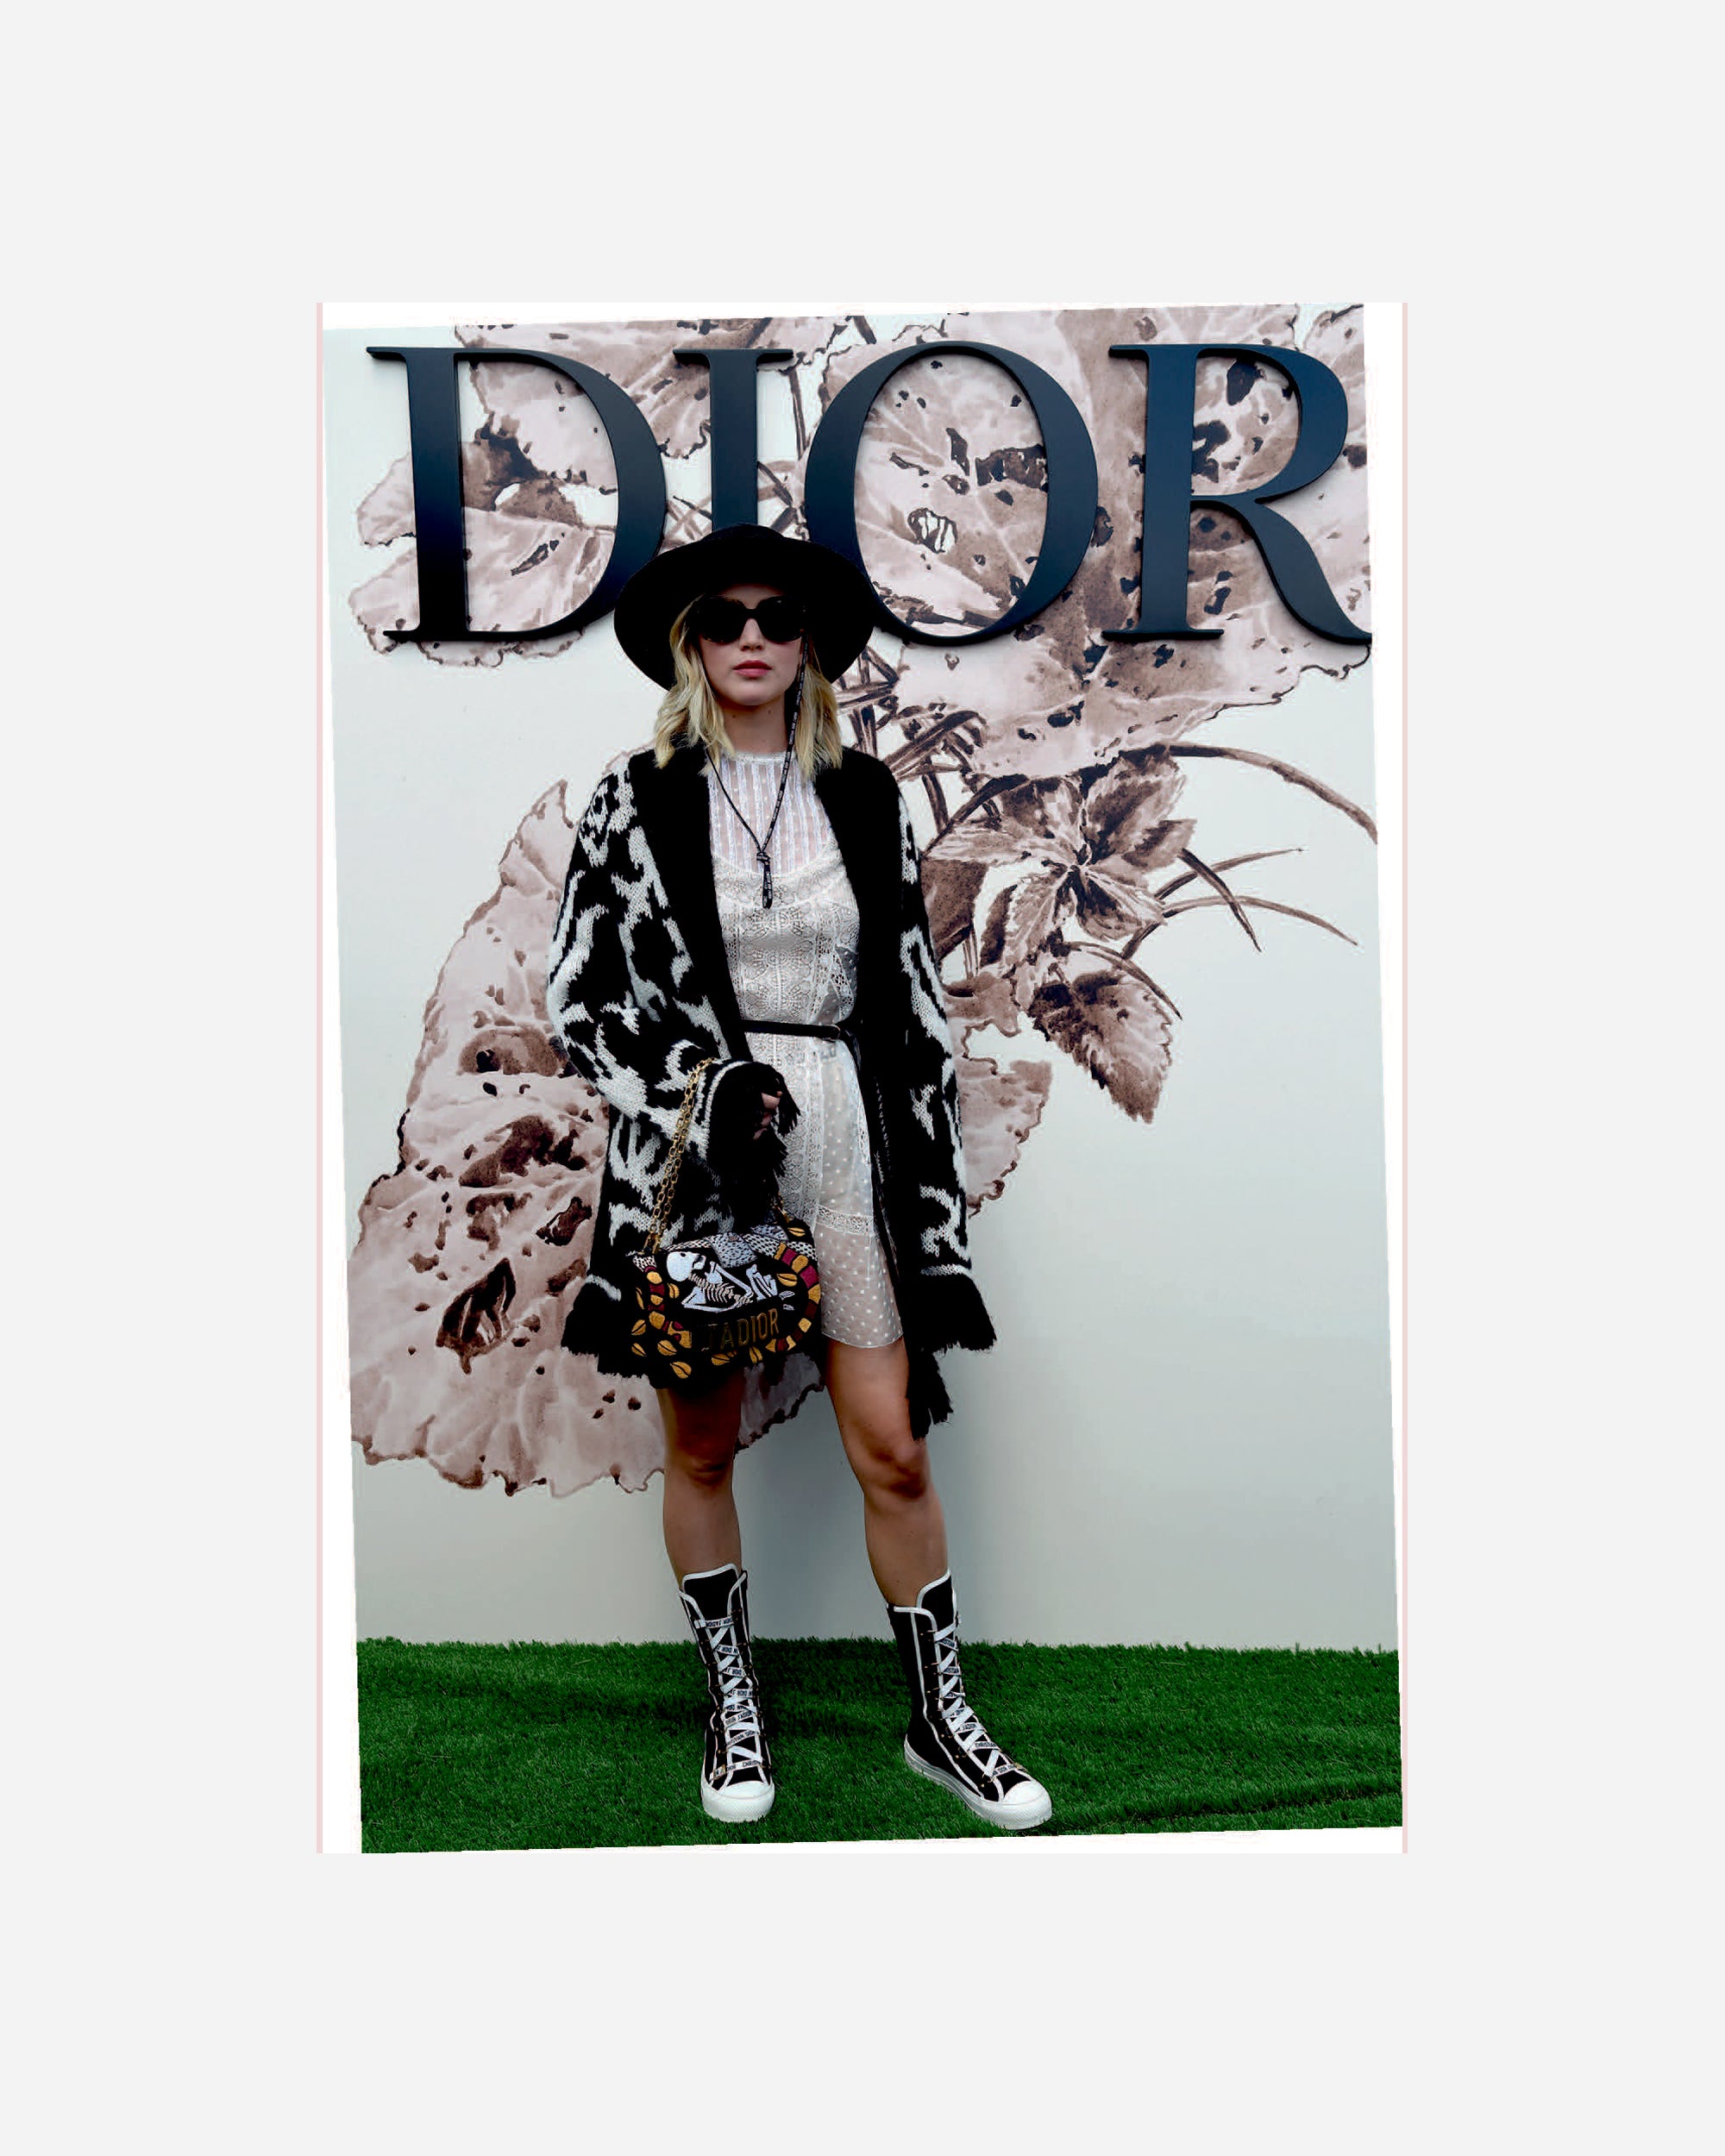 Welbeck Publishing Little Book of Dior Rose CB1007